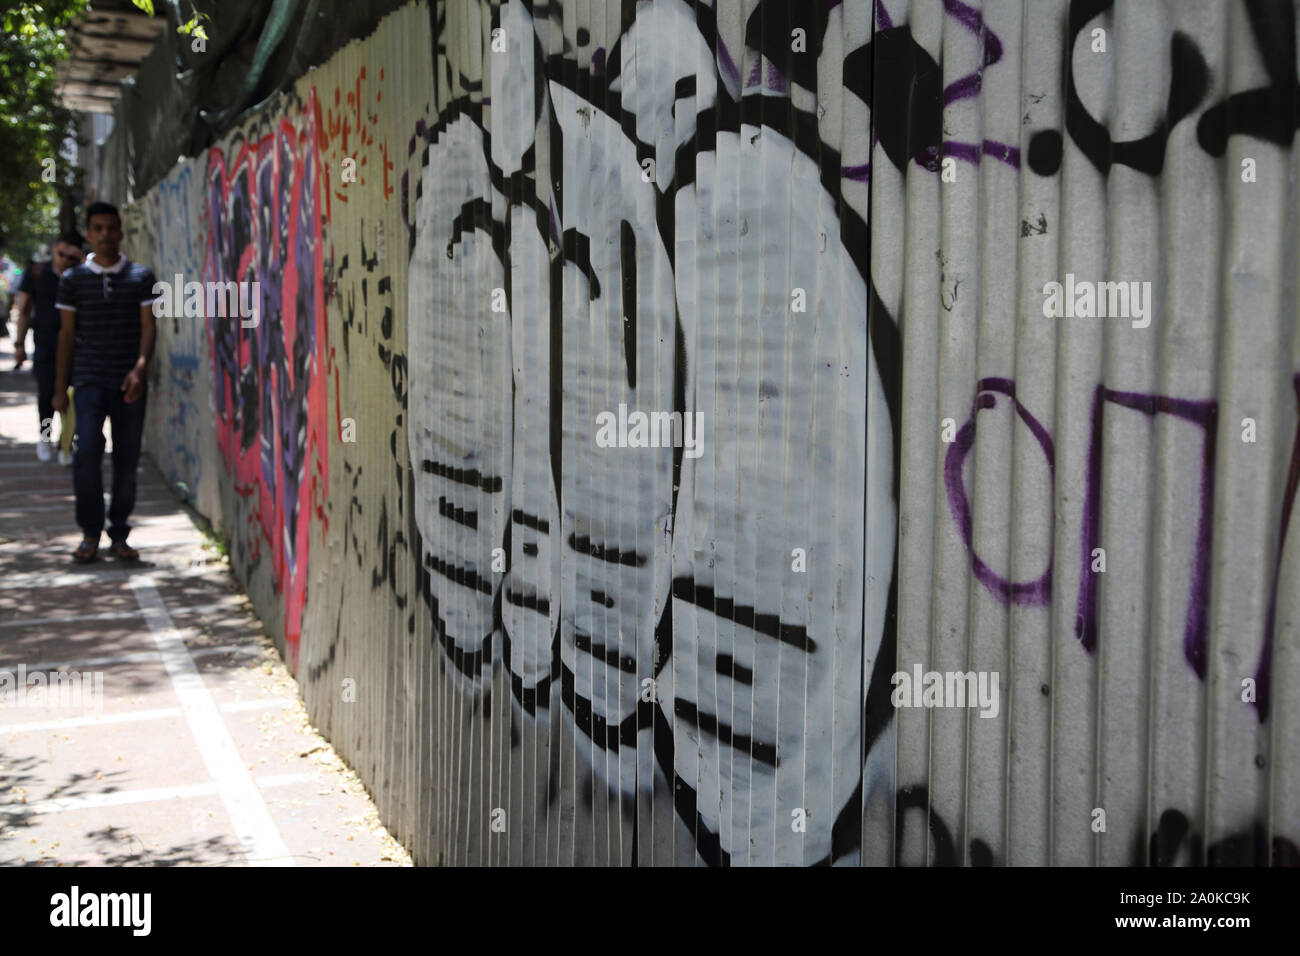 Athens Greece Stadiou Street Derelict Building with Graffiti on Corrugated Fence Stock Photo